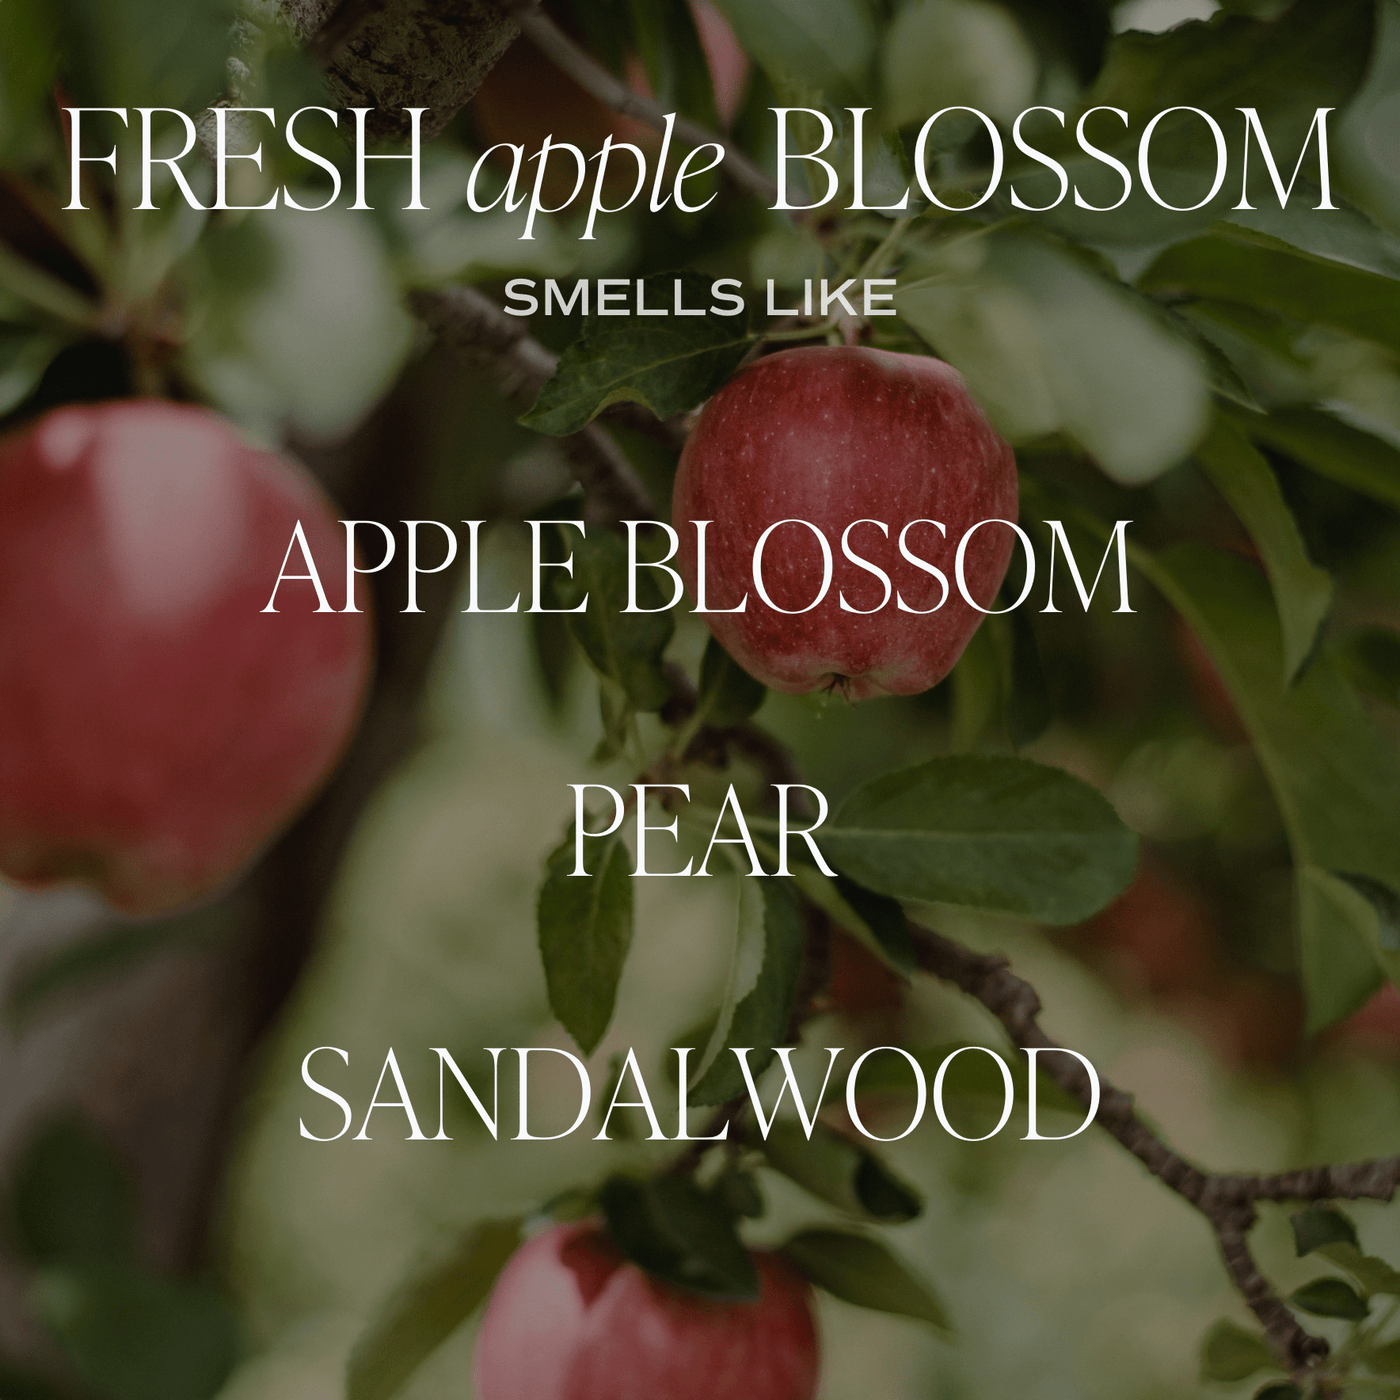 Fresh Apple Blossom Soy Candle - White Jar - 11 oz - Sweet Water Decor - Candles